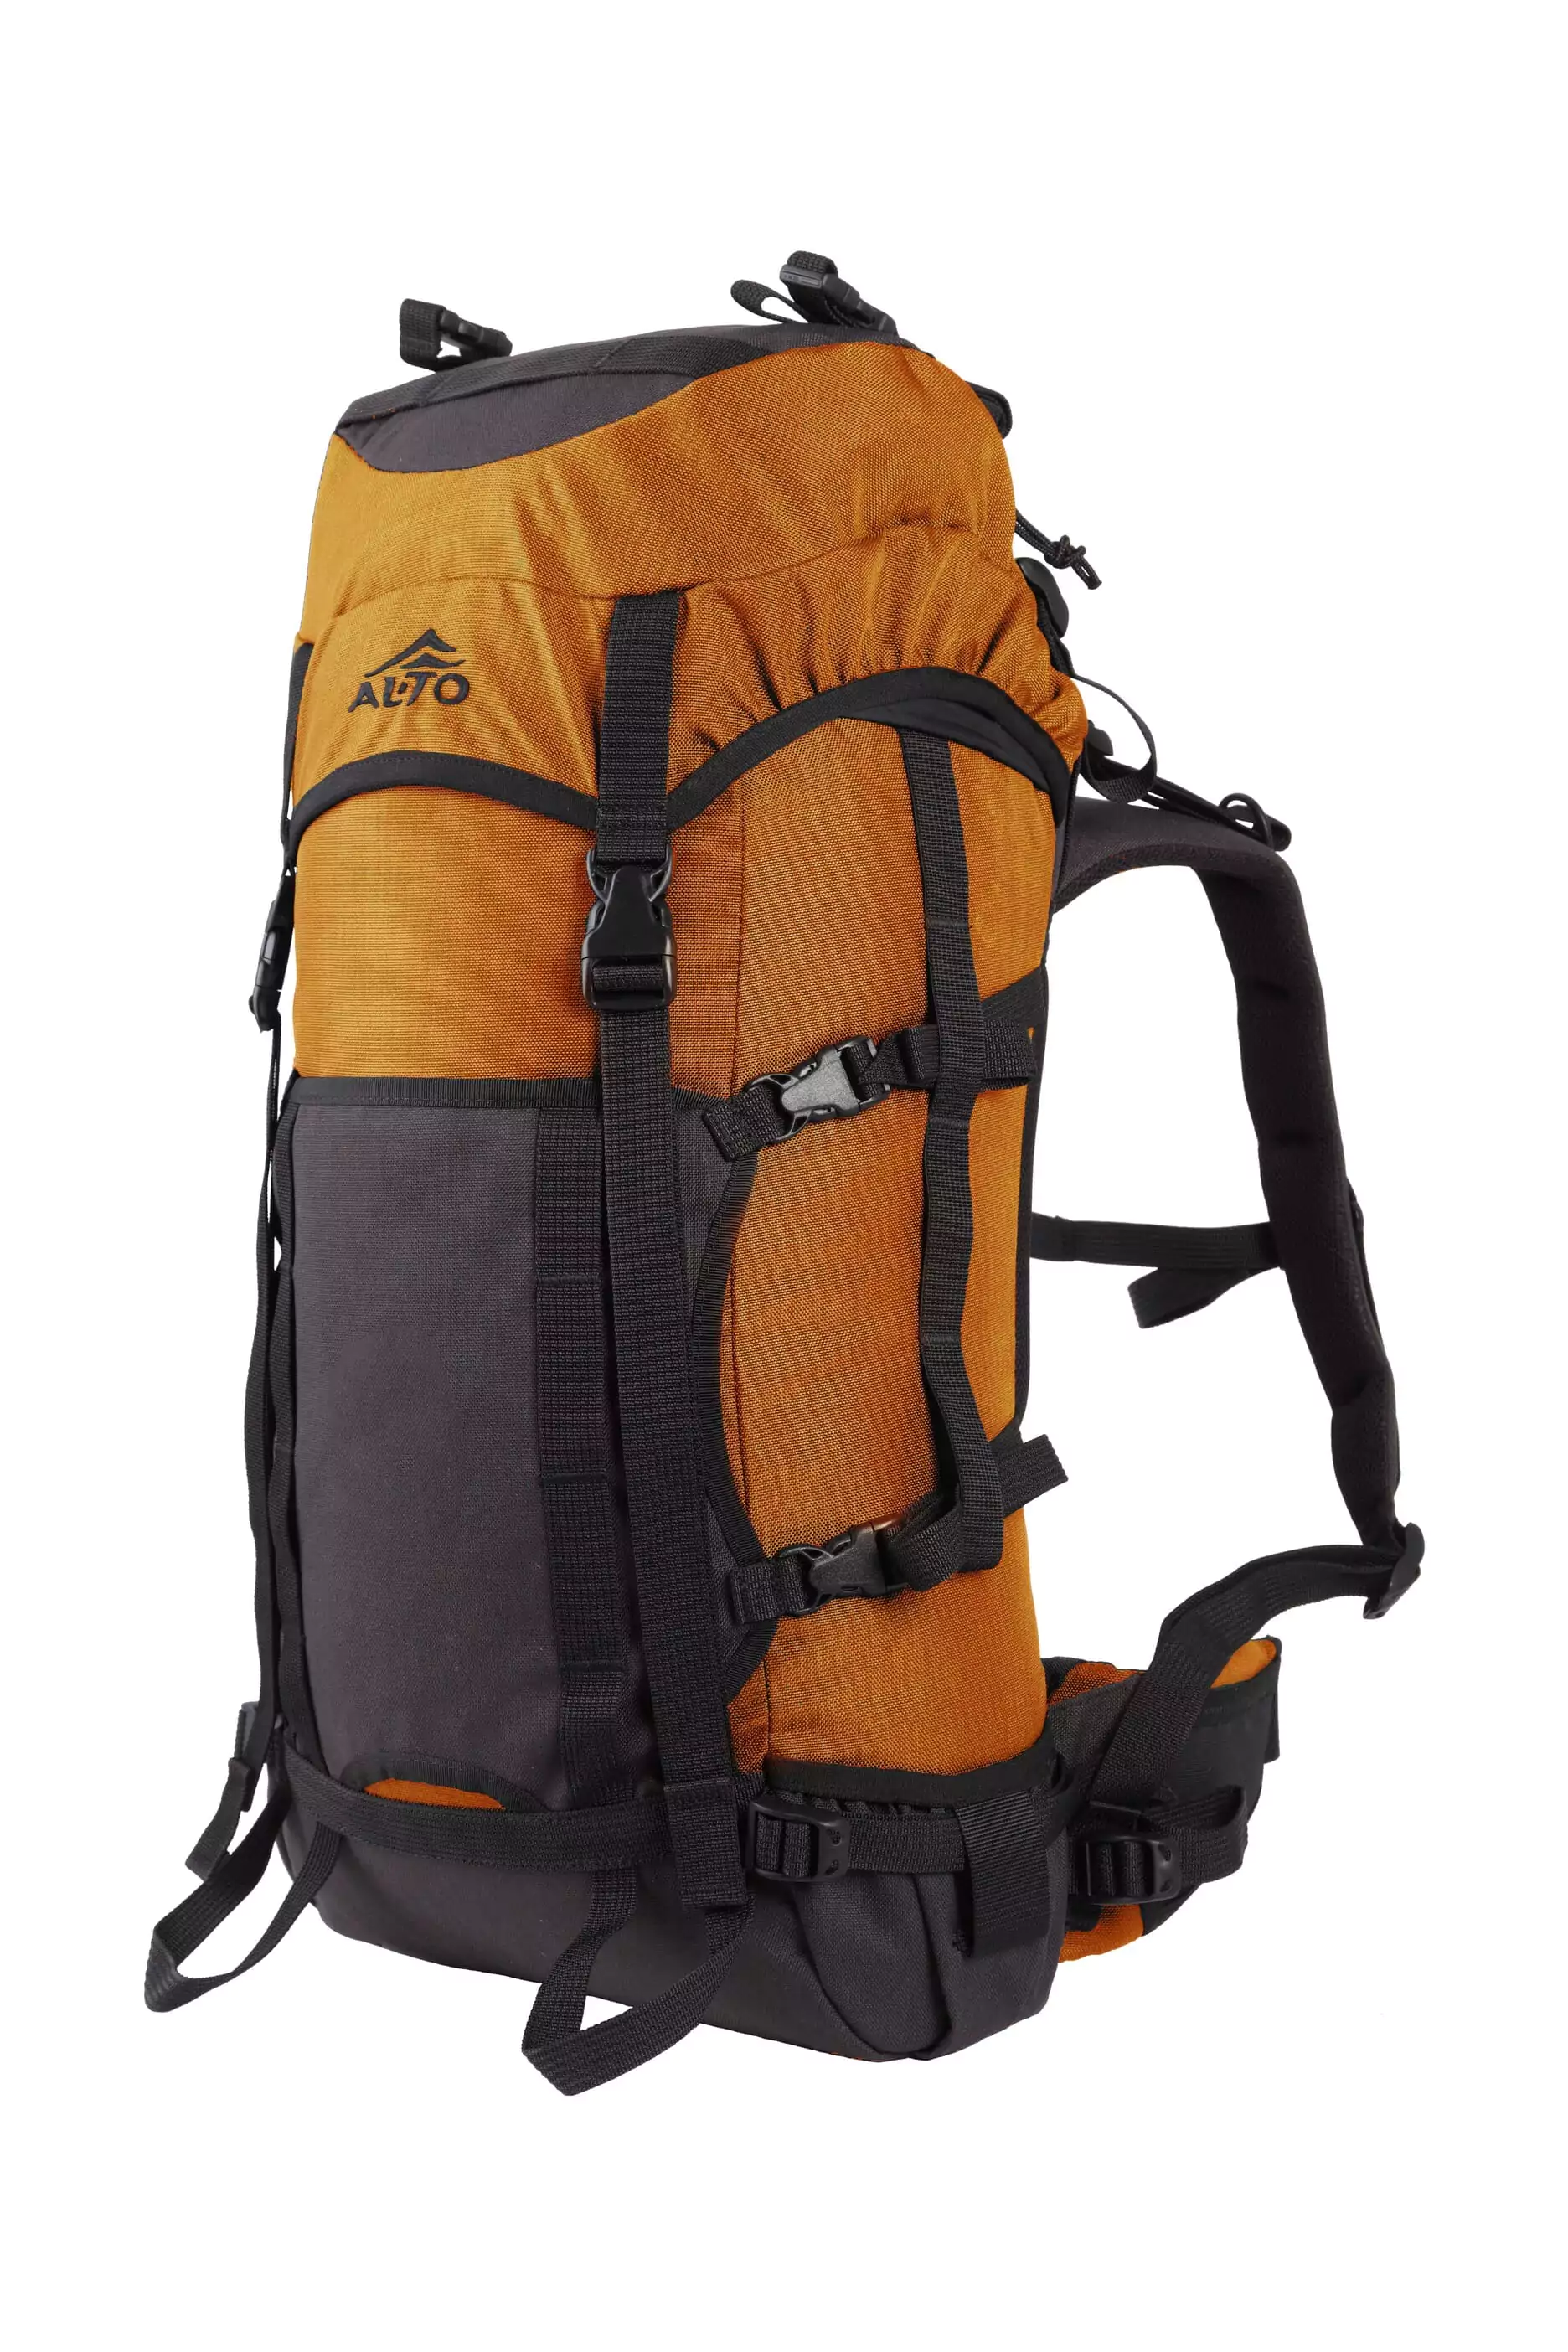 EXTREME 35 hiking or climbing bags